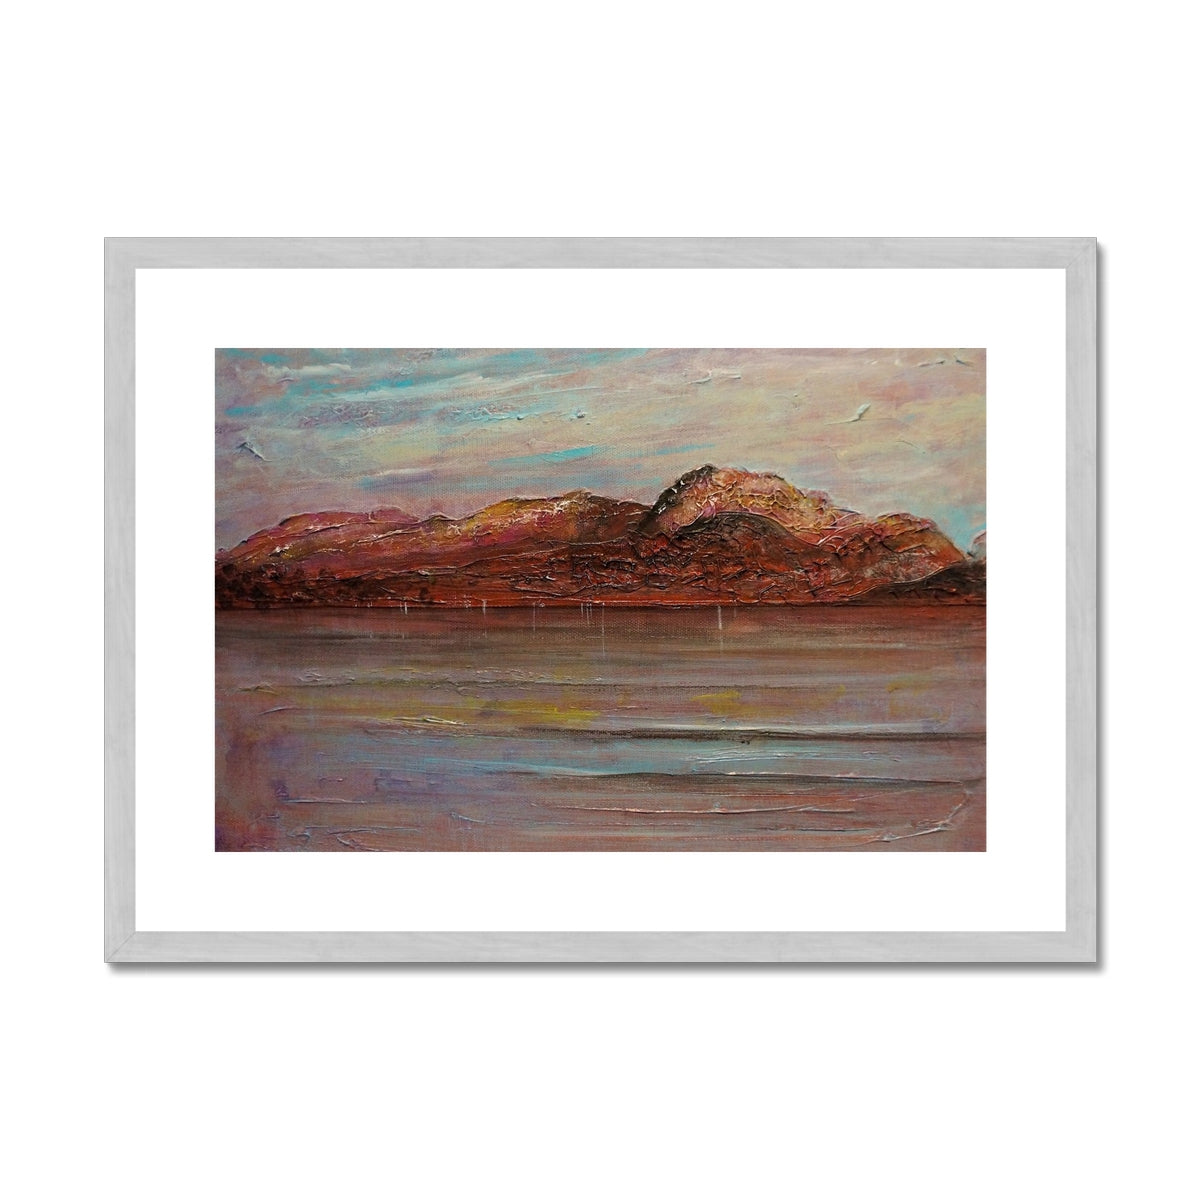 Ben Nevis Painting | Antique Framed & Mounted Prints From Scotland-Antique Framed & Mounted Prints-Scottish Lochs & Mountains Art Gallery-A2 Landscape-Silver Frame-Paintings, Prints, Homeware, Art Gifts From Scotland By Scottish Artist Kevin Hunter